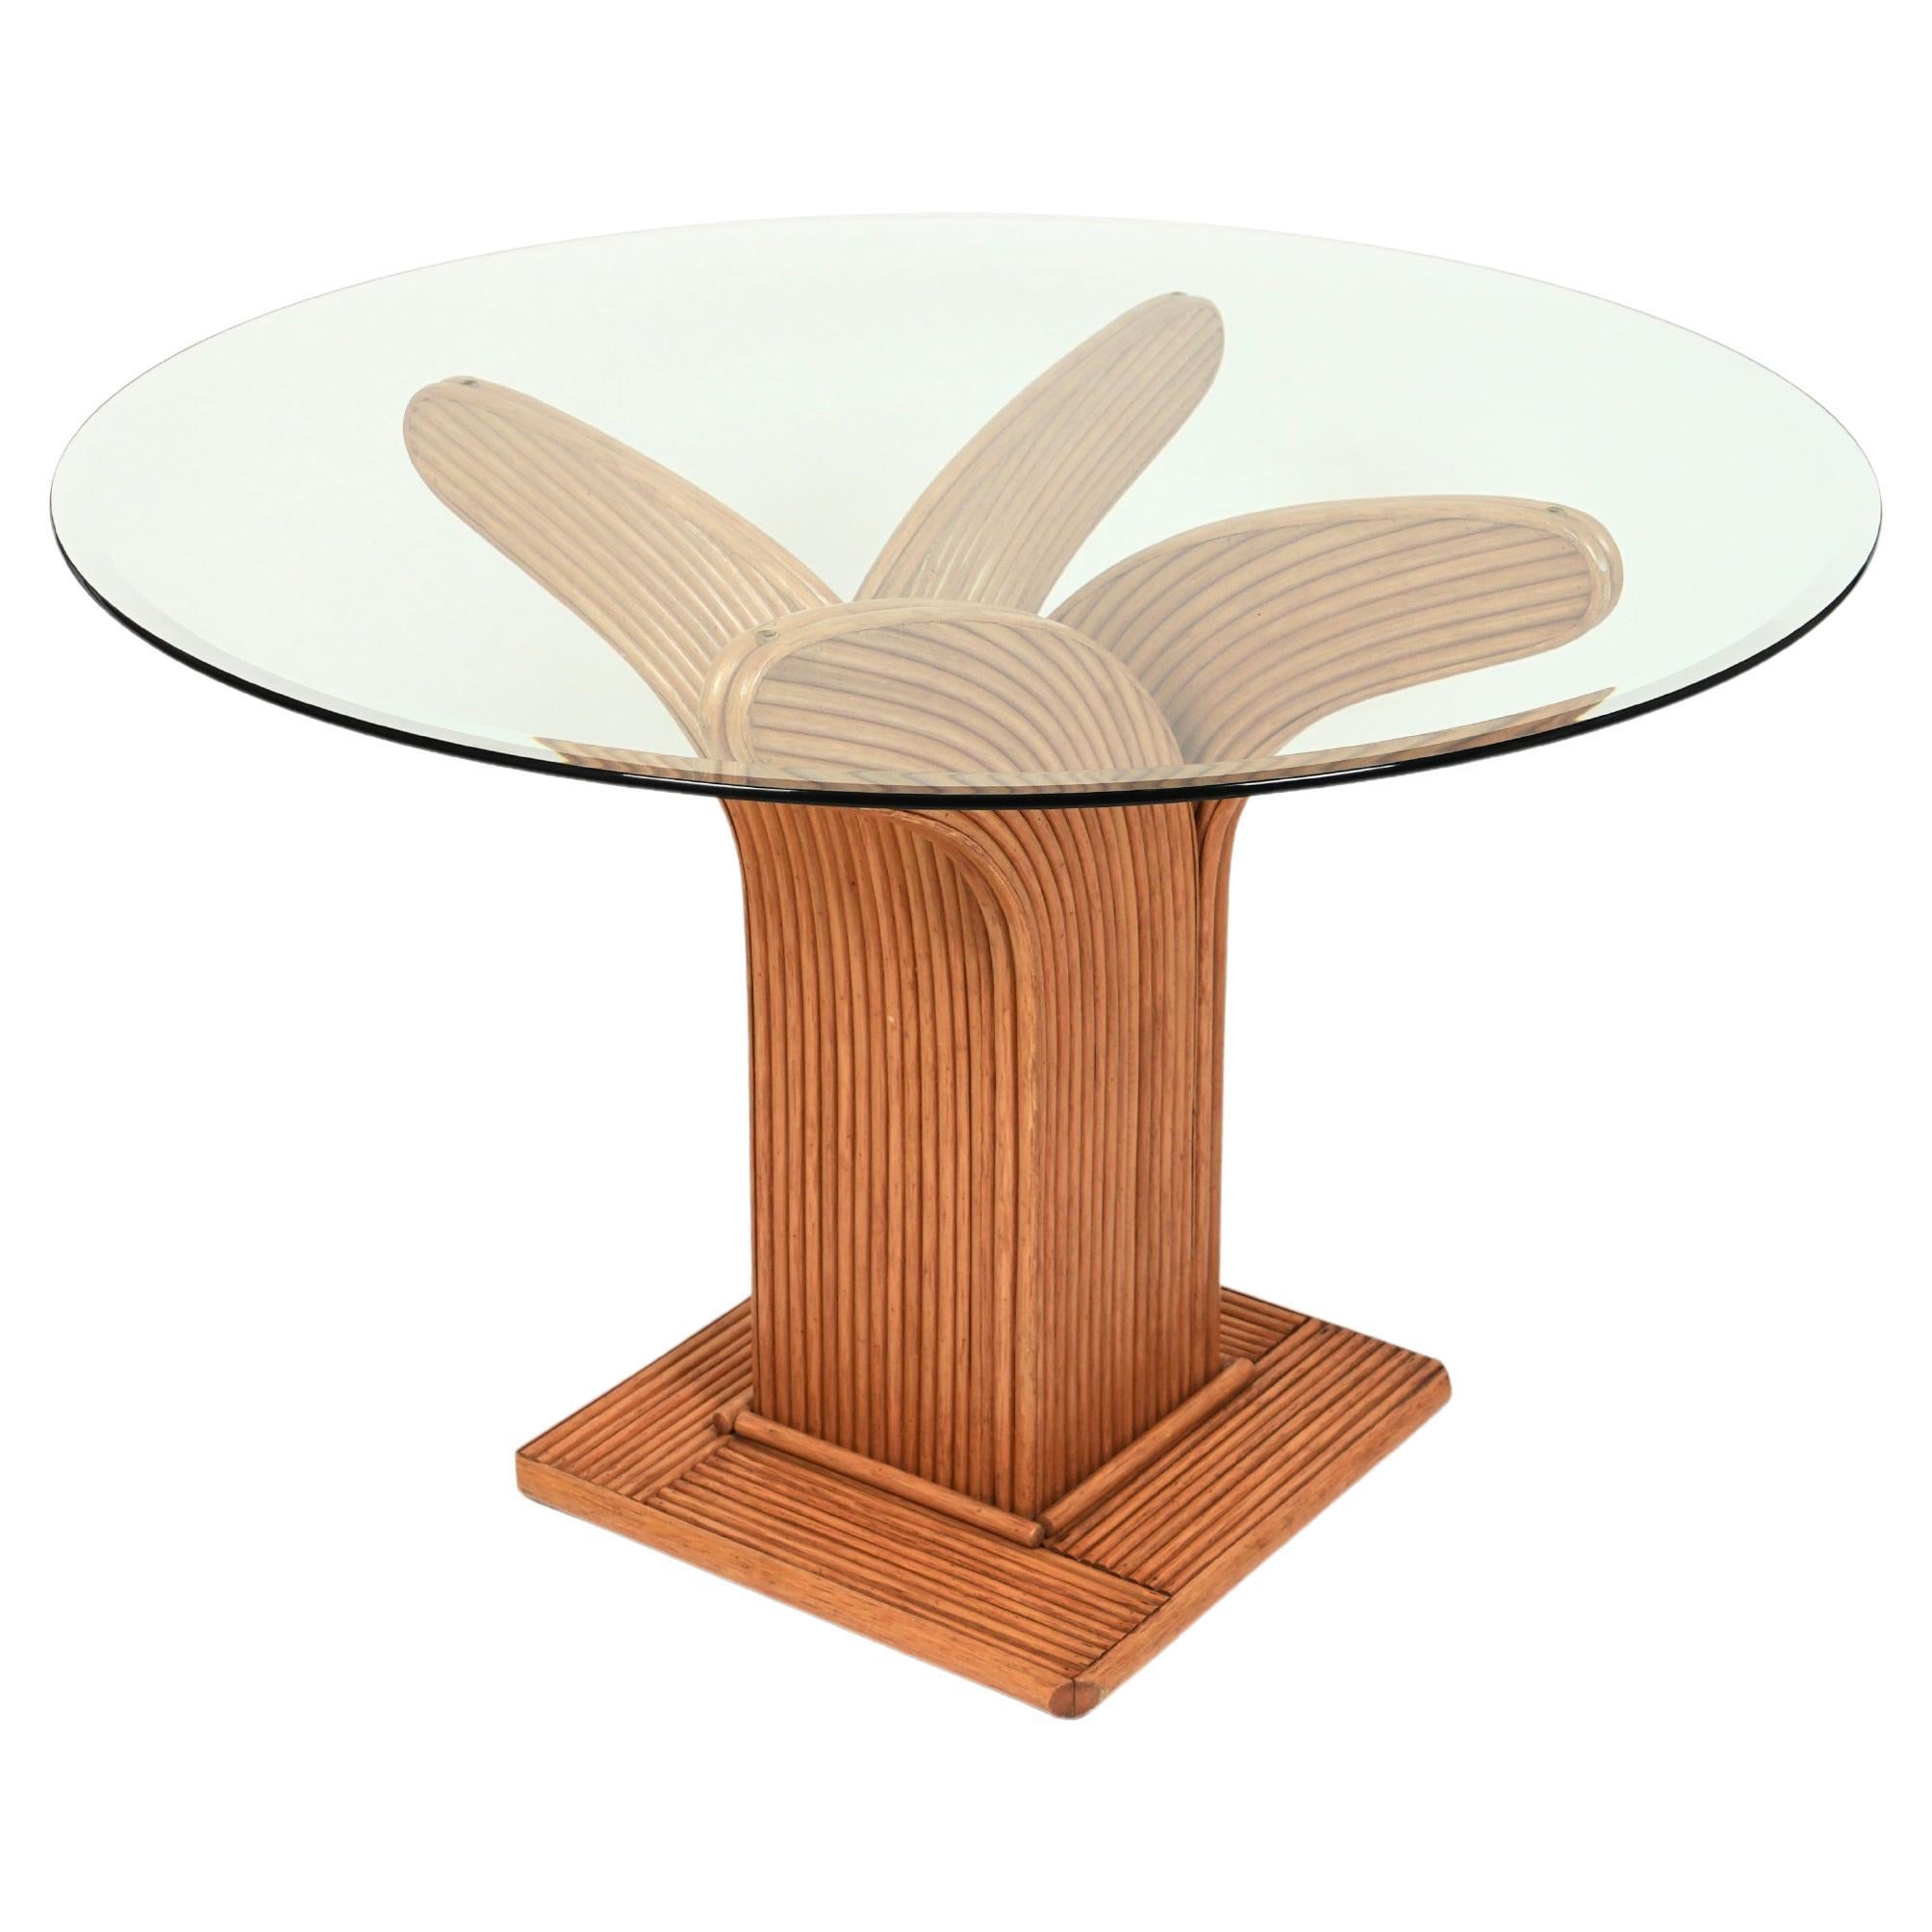 Bamboo Rattan and Glass Round Dinning Room Table by Vivai Del Sud, Italy, 1970s For Sale